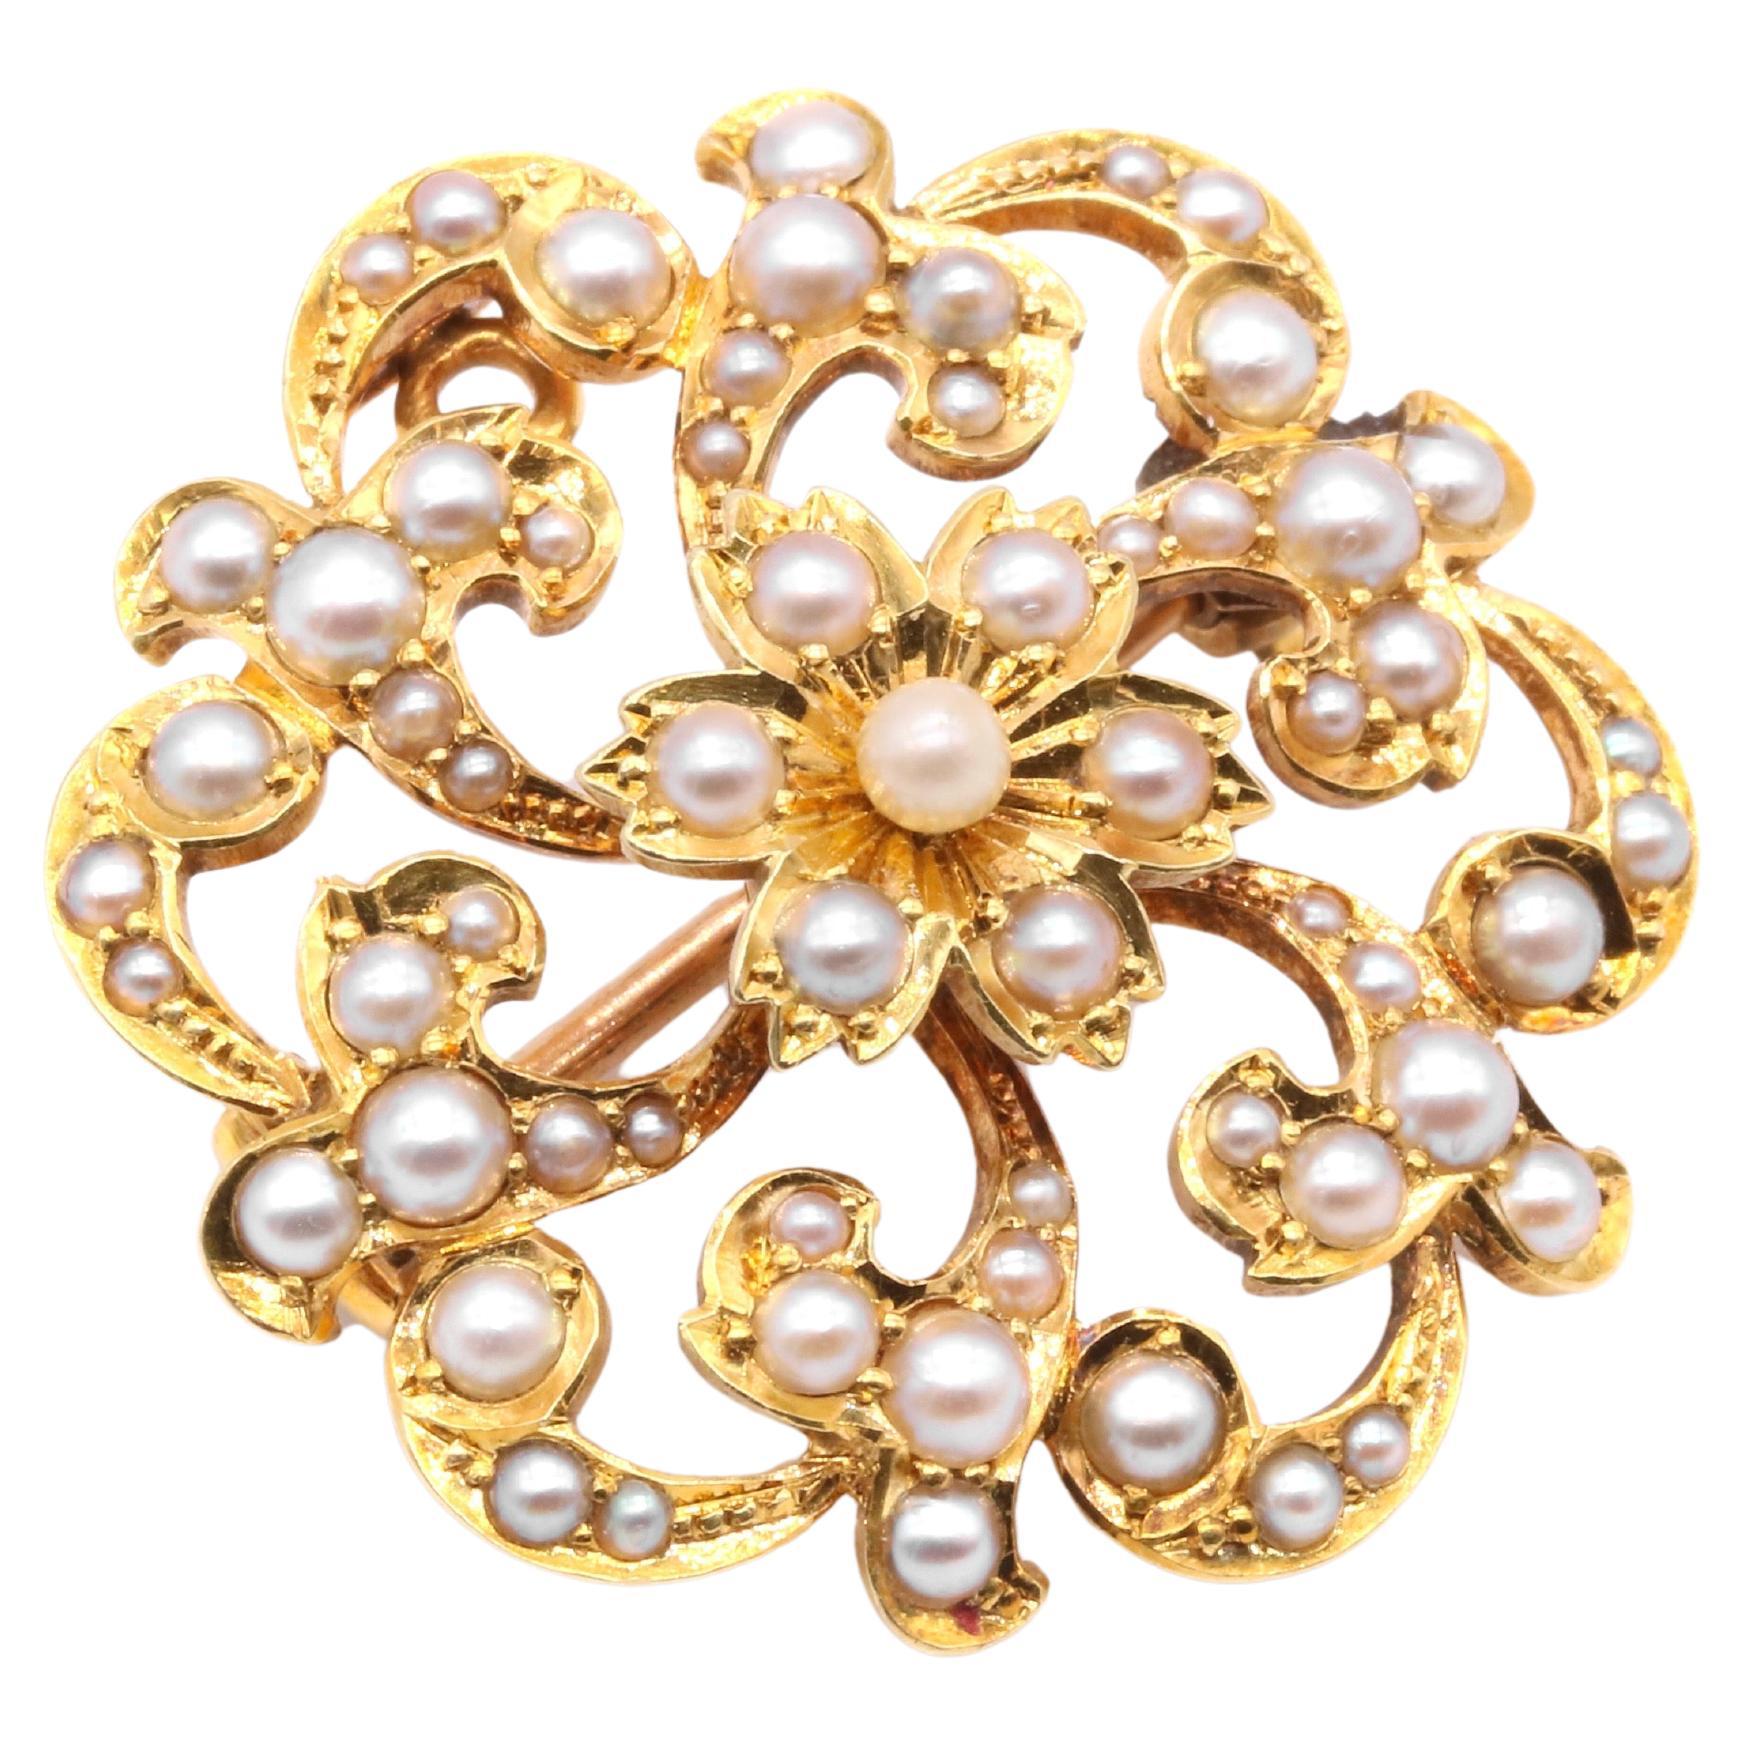 Antique Edwardian 15K Yellow Gold Pearl Floral Brooch and Pendant